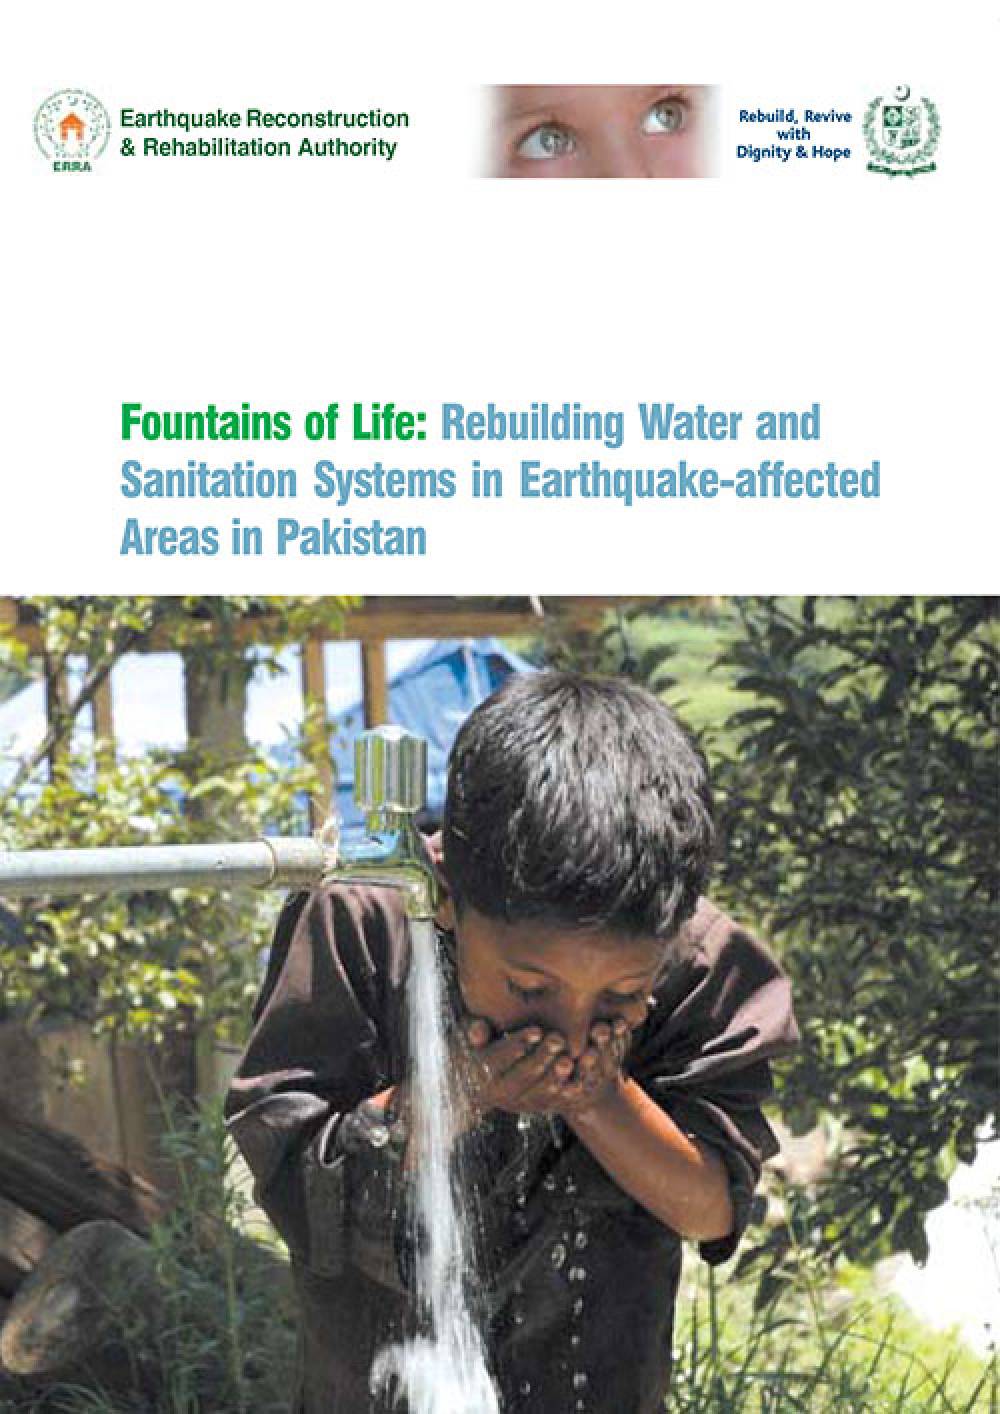 Rebuilding Water and Sanitation Systems